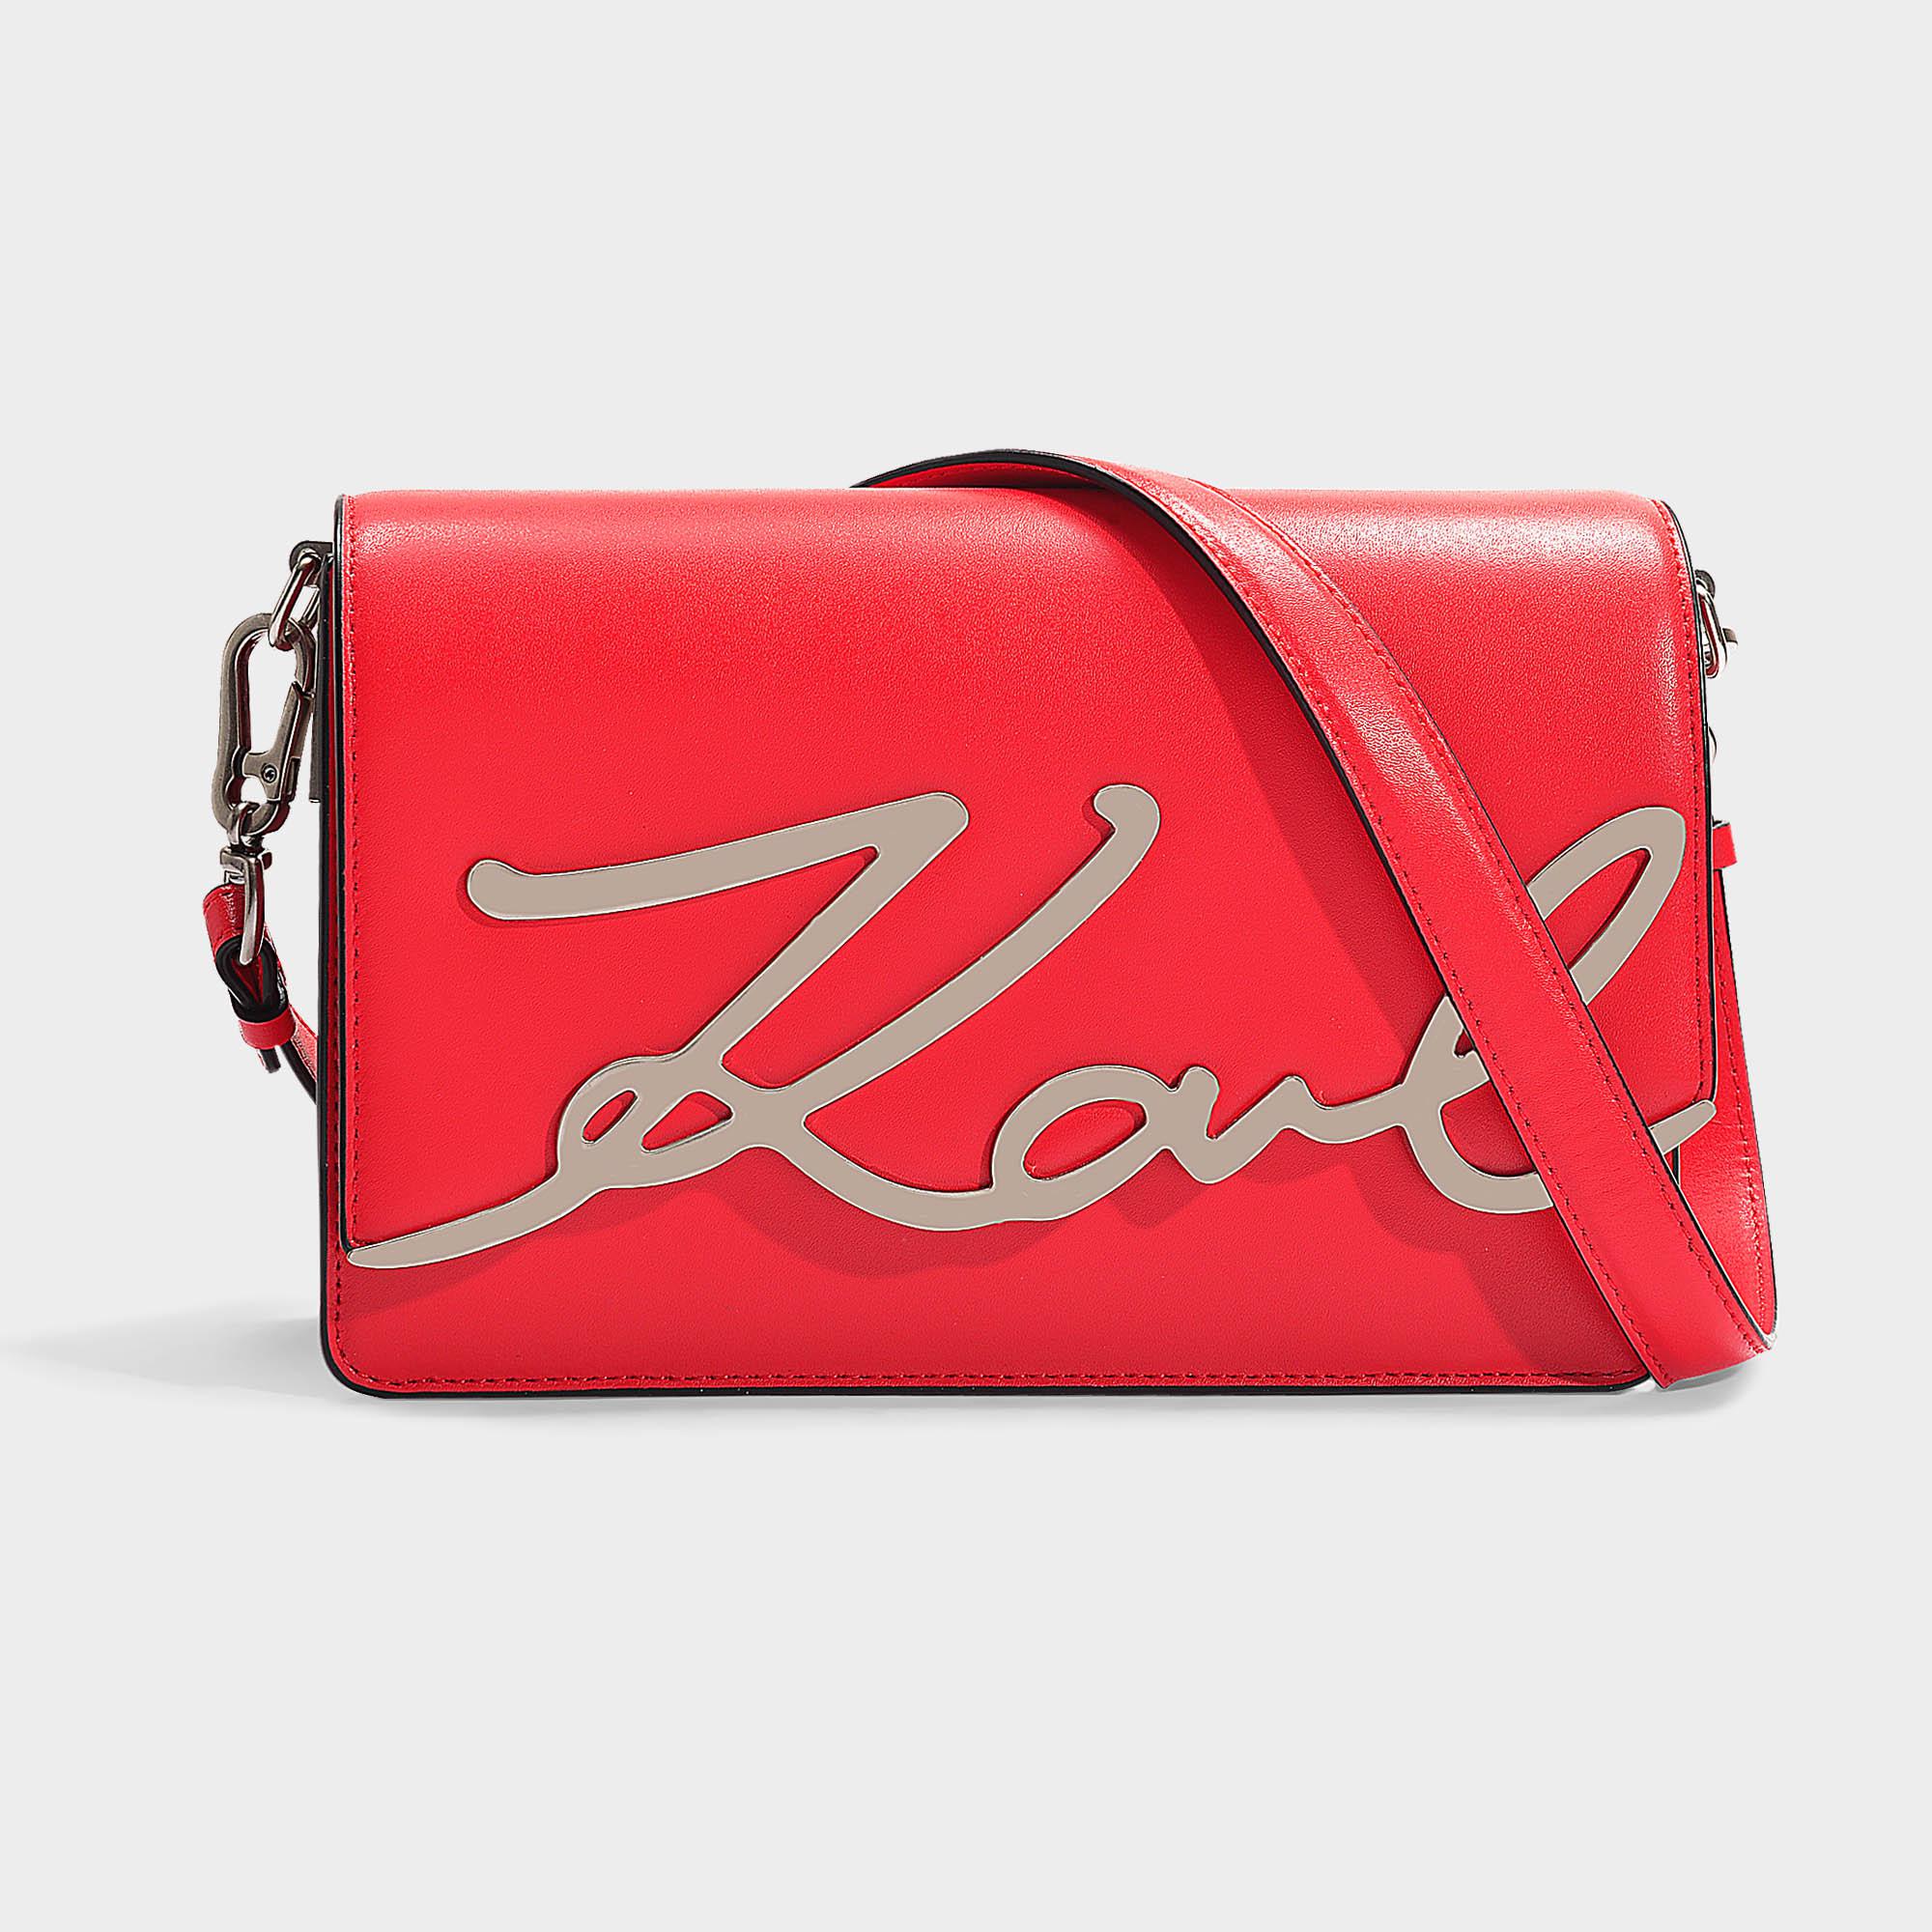 Karl Lagerfeld Leather K/signature Shoulder Bag in Red | Lyst